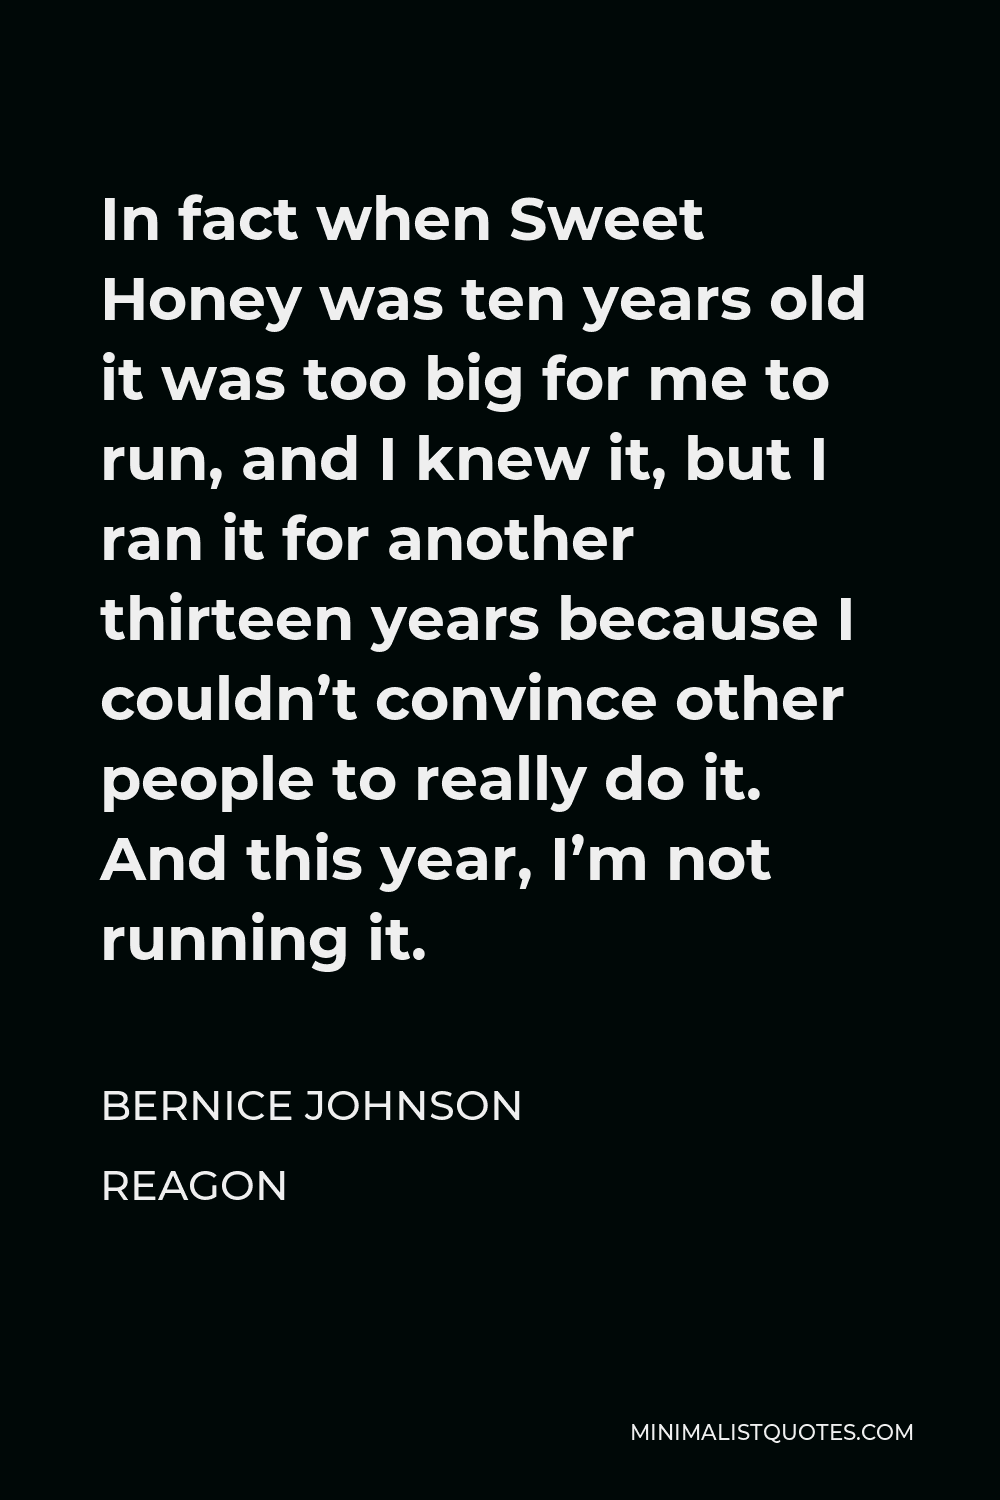 Bernice Johnson Reagon Quote - In fact when Sweet Honey was ten years old it was too big for me to run, and I knew it, but I ran it for another thirteen years because I couldn’t convince other people to really do it. And this year, I’m not running it.